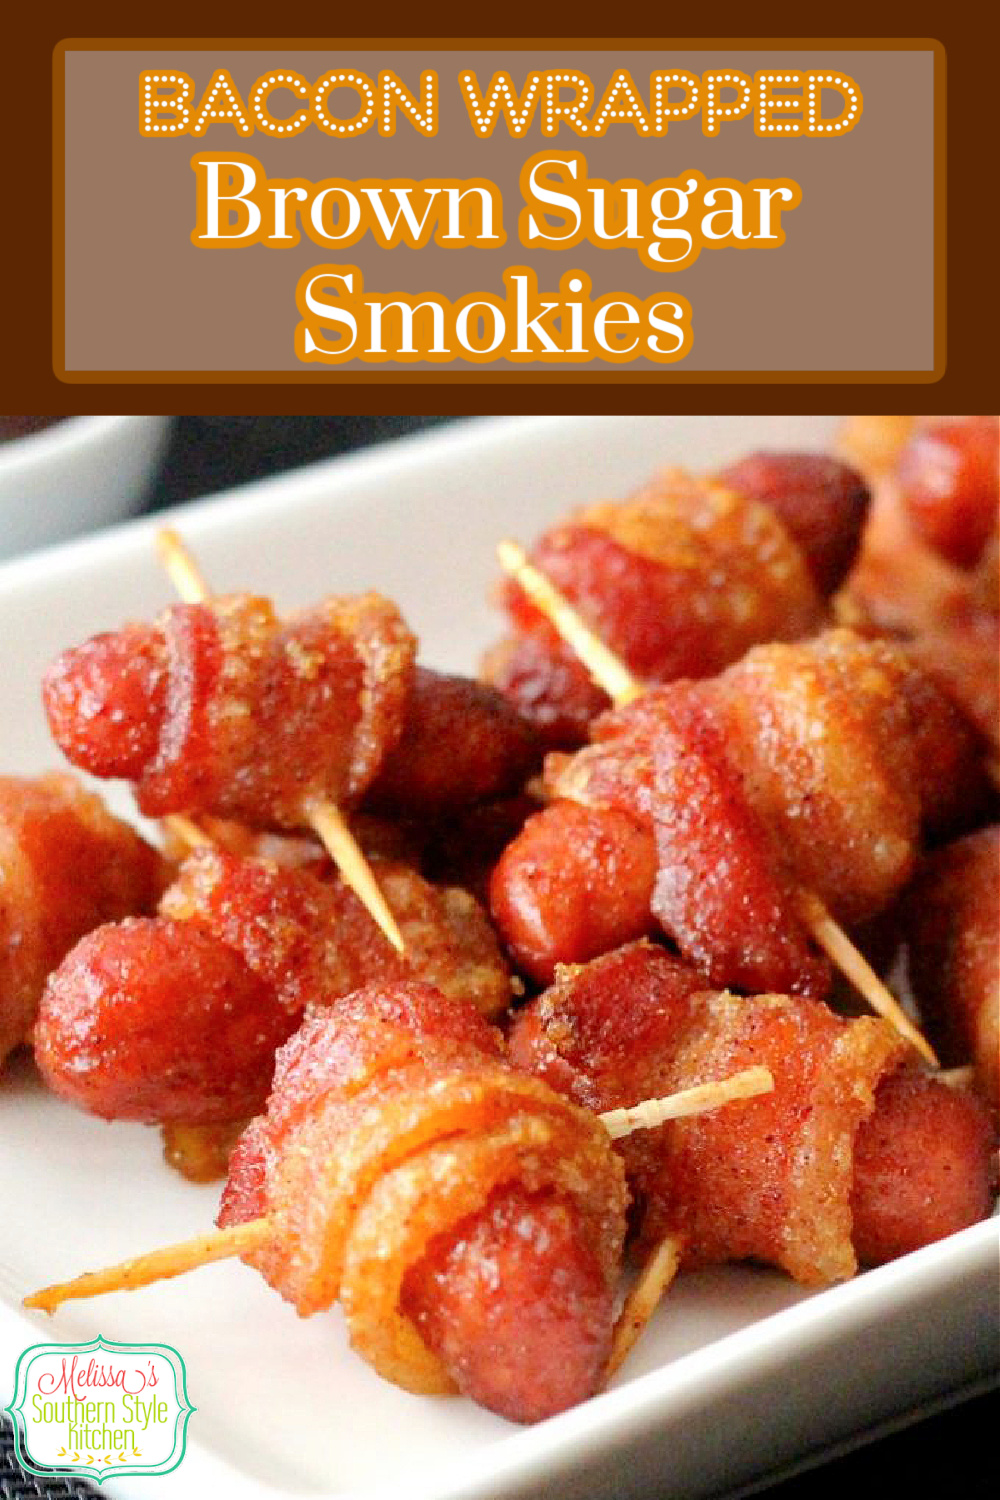 These sweet and spicy Bacon Wrapped Brown Sugar Smokies are the epitome of bite-size appetizers people love #smokies #brownsugarsmokies #bacon #baconwrappedsmokies #easyappetizers #smokedsausage #sausagerecipes #gamedaysnacks #footballfood #holidayrecipes #southernfood #southernrecipes